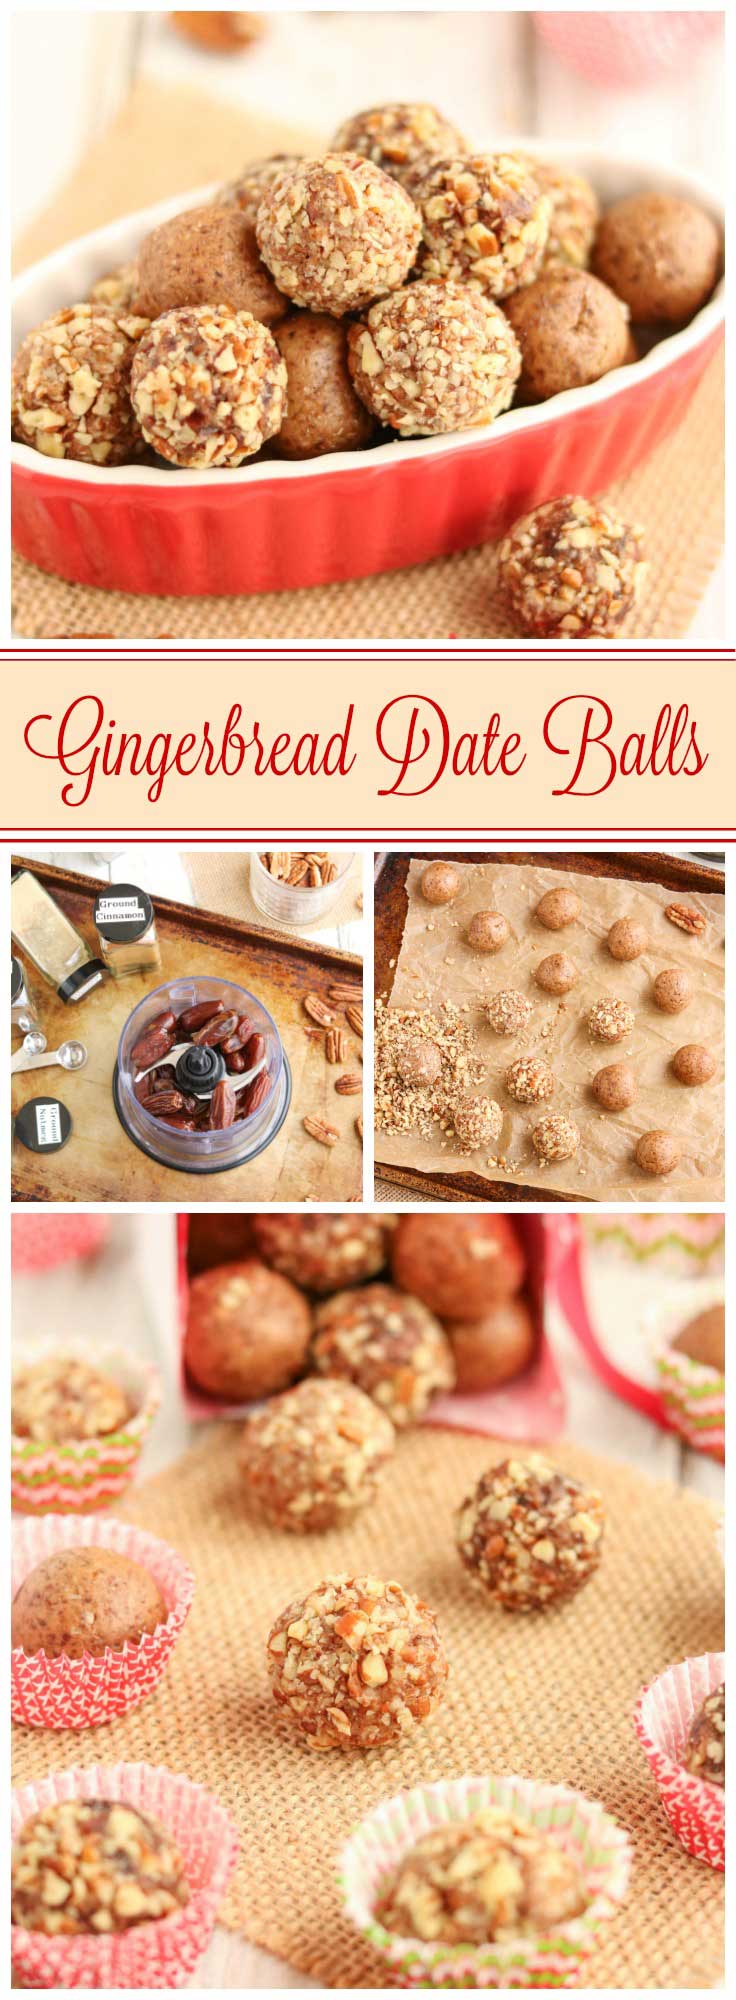 Easy no-bake holiday treats! These delicious Gingerbread Date Balls take just minutes to make! They’re filled with yummy, holiday gingerbread spices - indulgent enough for holiday desserts or for pretty Christmas cookie trays, yet nutritious enough for a healthy snack! No guilt in these little indulgences! Bonus: since this date ball recipe is so quick and can be made ahead and frozen, it’s perfect for last-minute, homemade DIY gifts, too! Can be made nut-free. | www.TwoHealthyKitchens.com